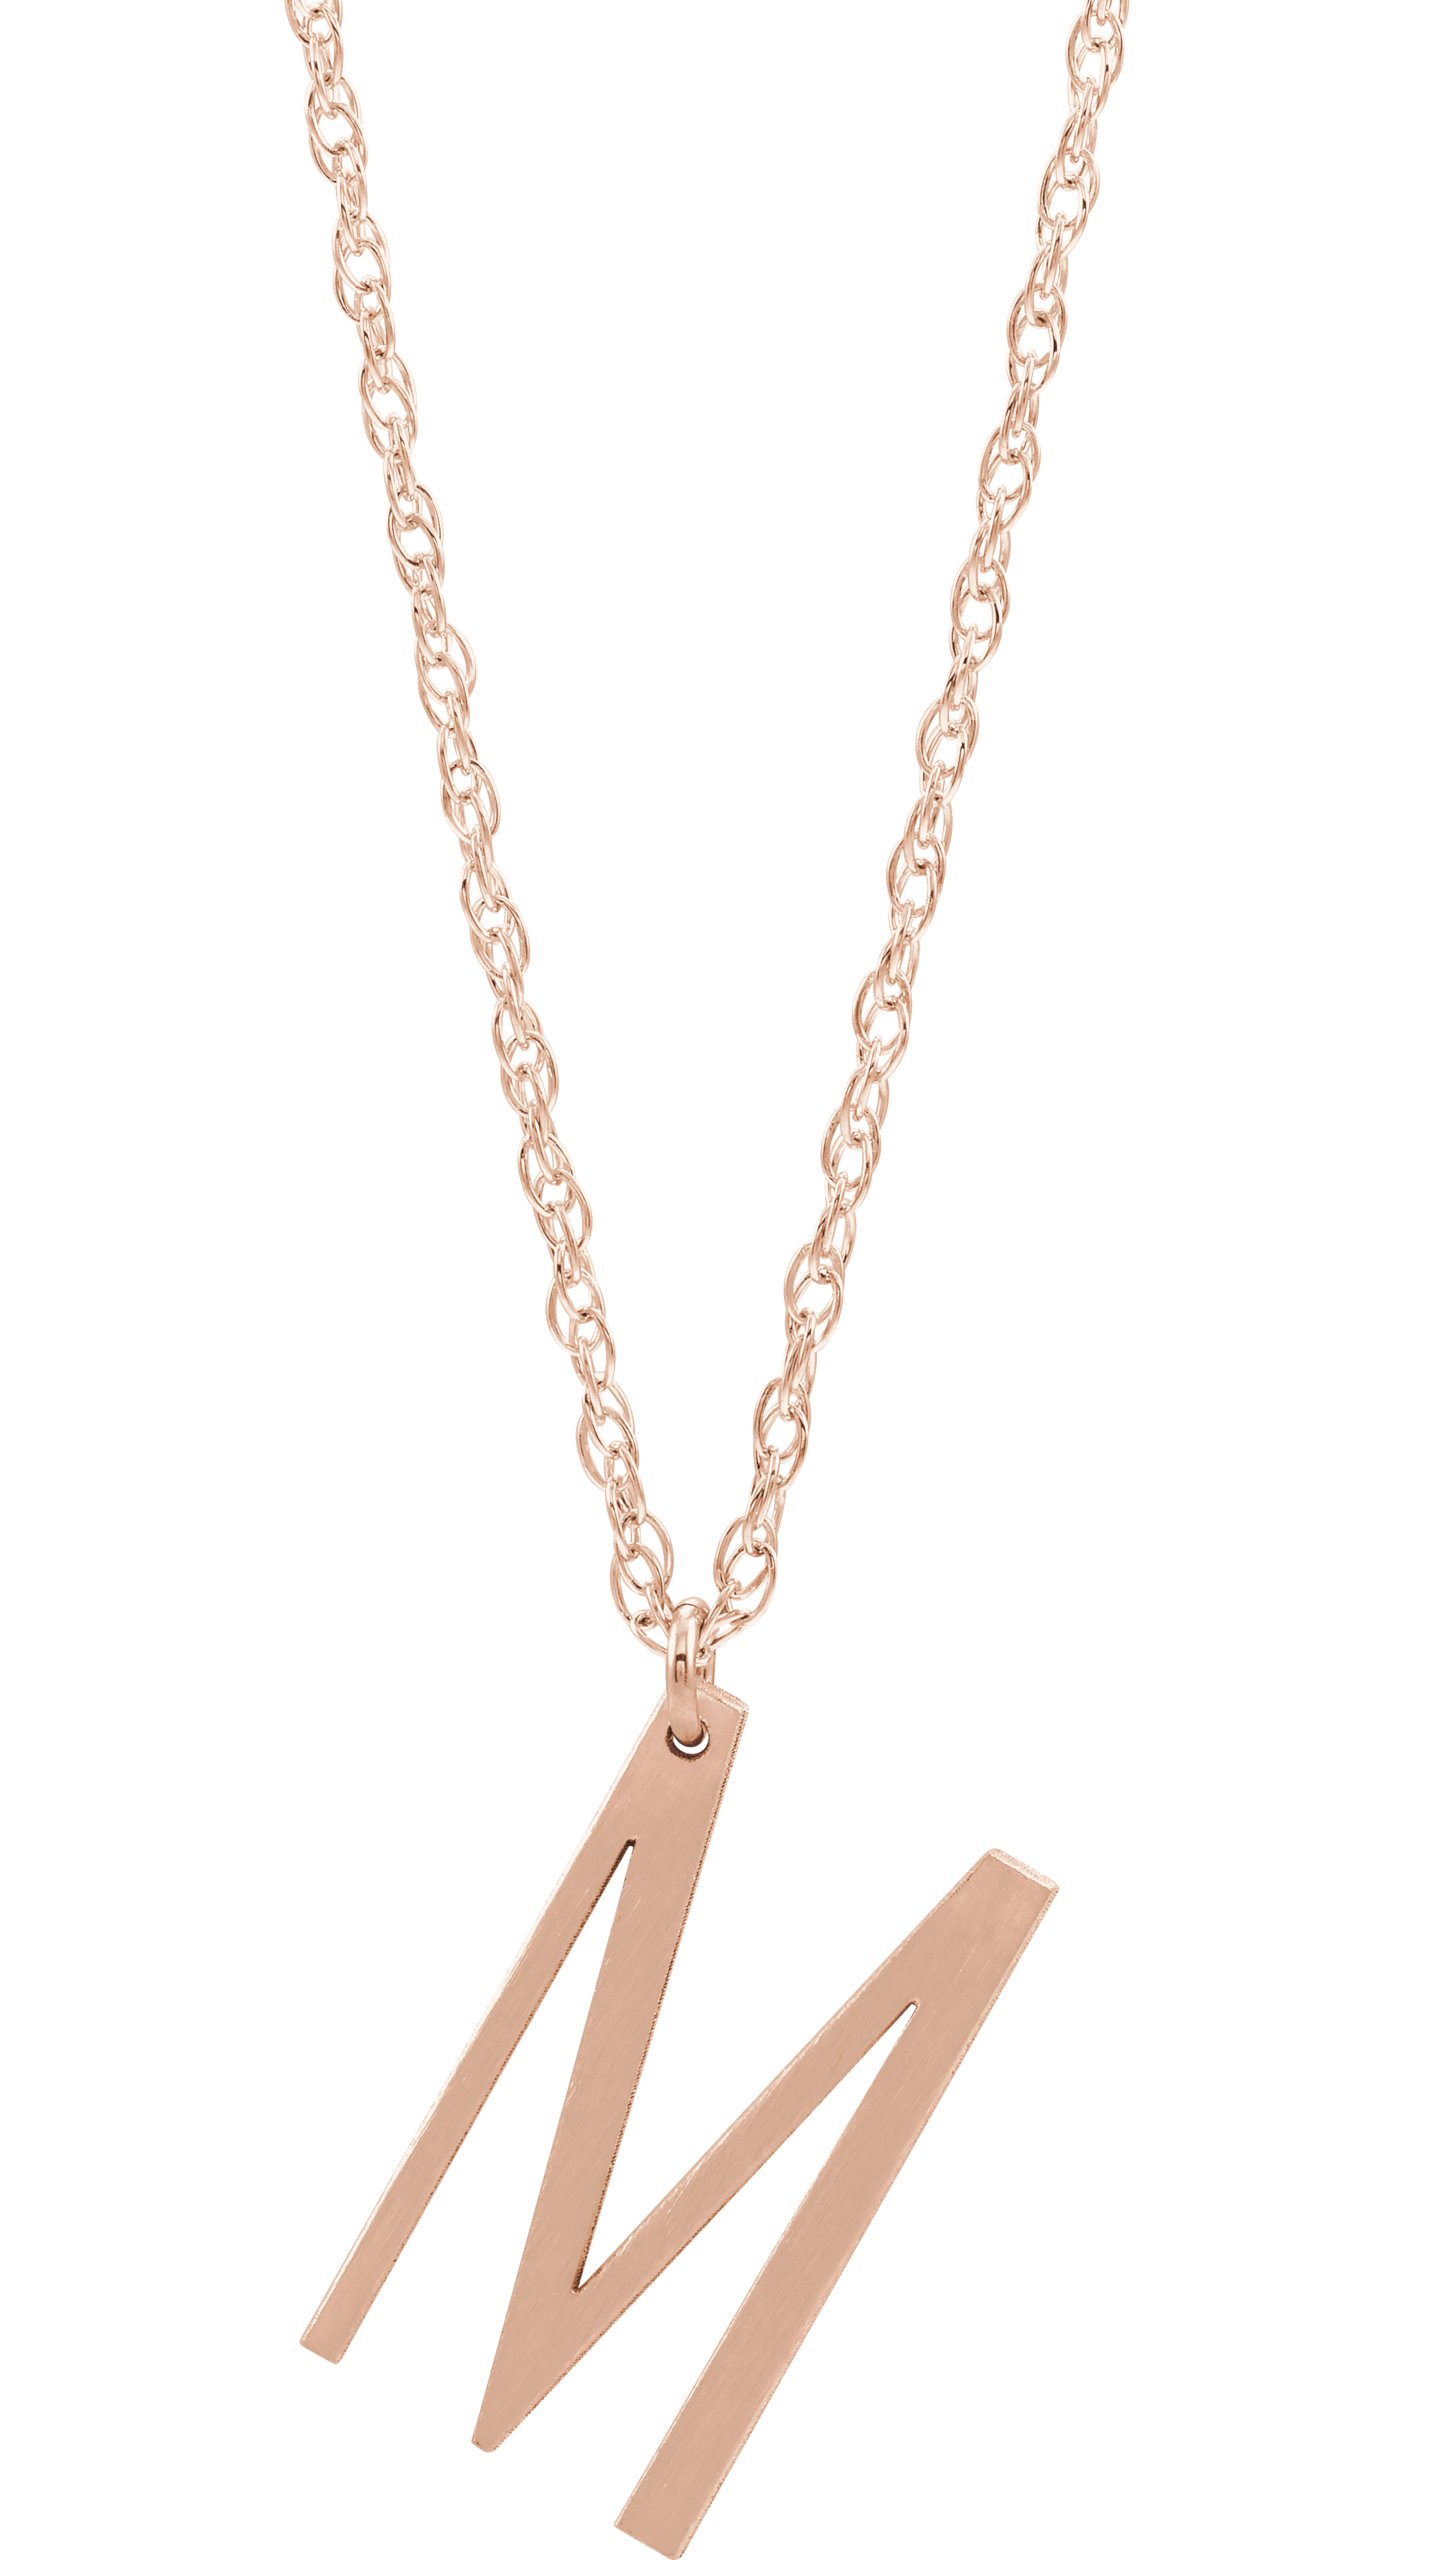 14K Rose Gold-Plated Sterling Silver Block Initial M 16-18" Necklace with Brush Finish